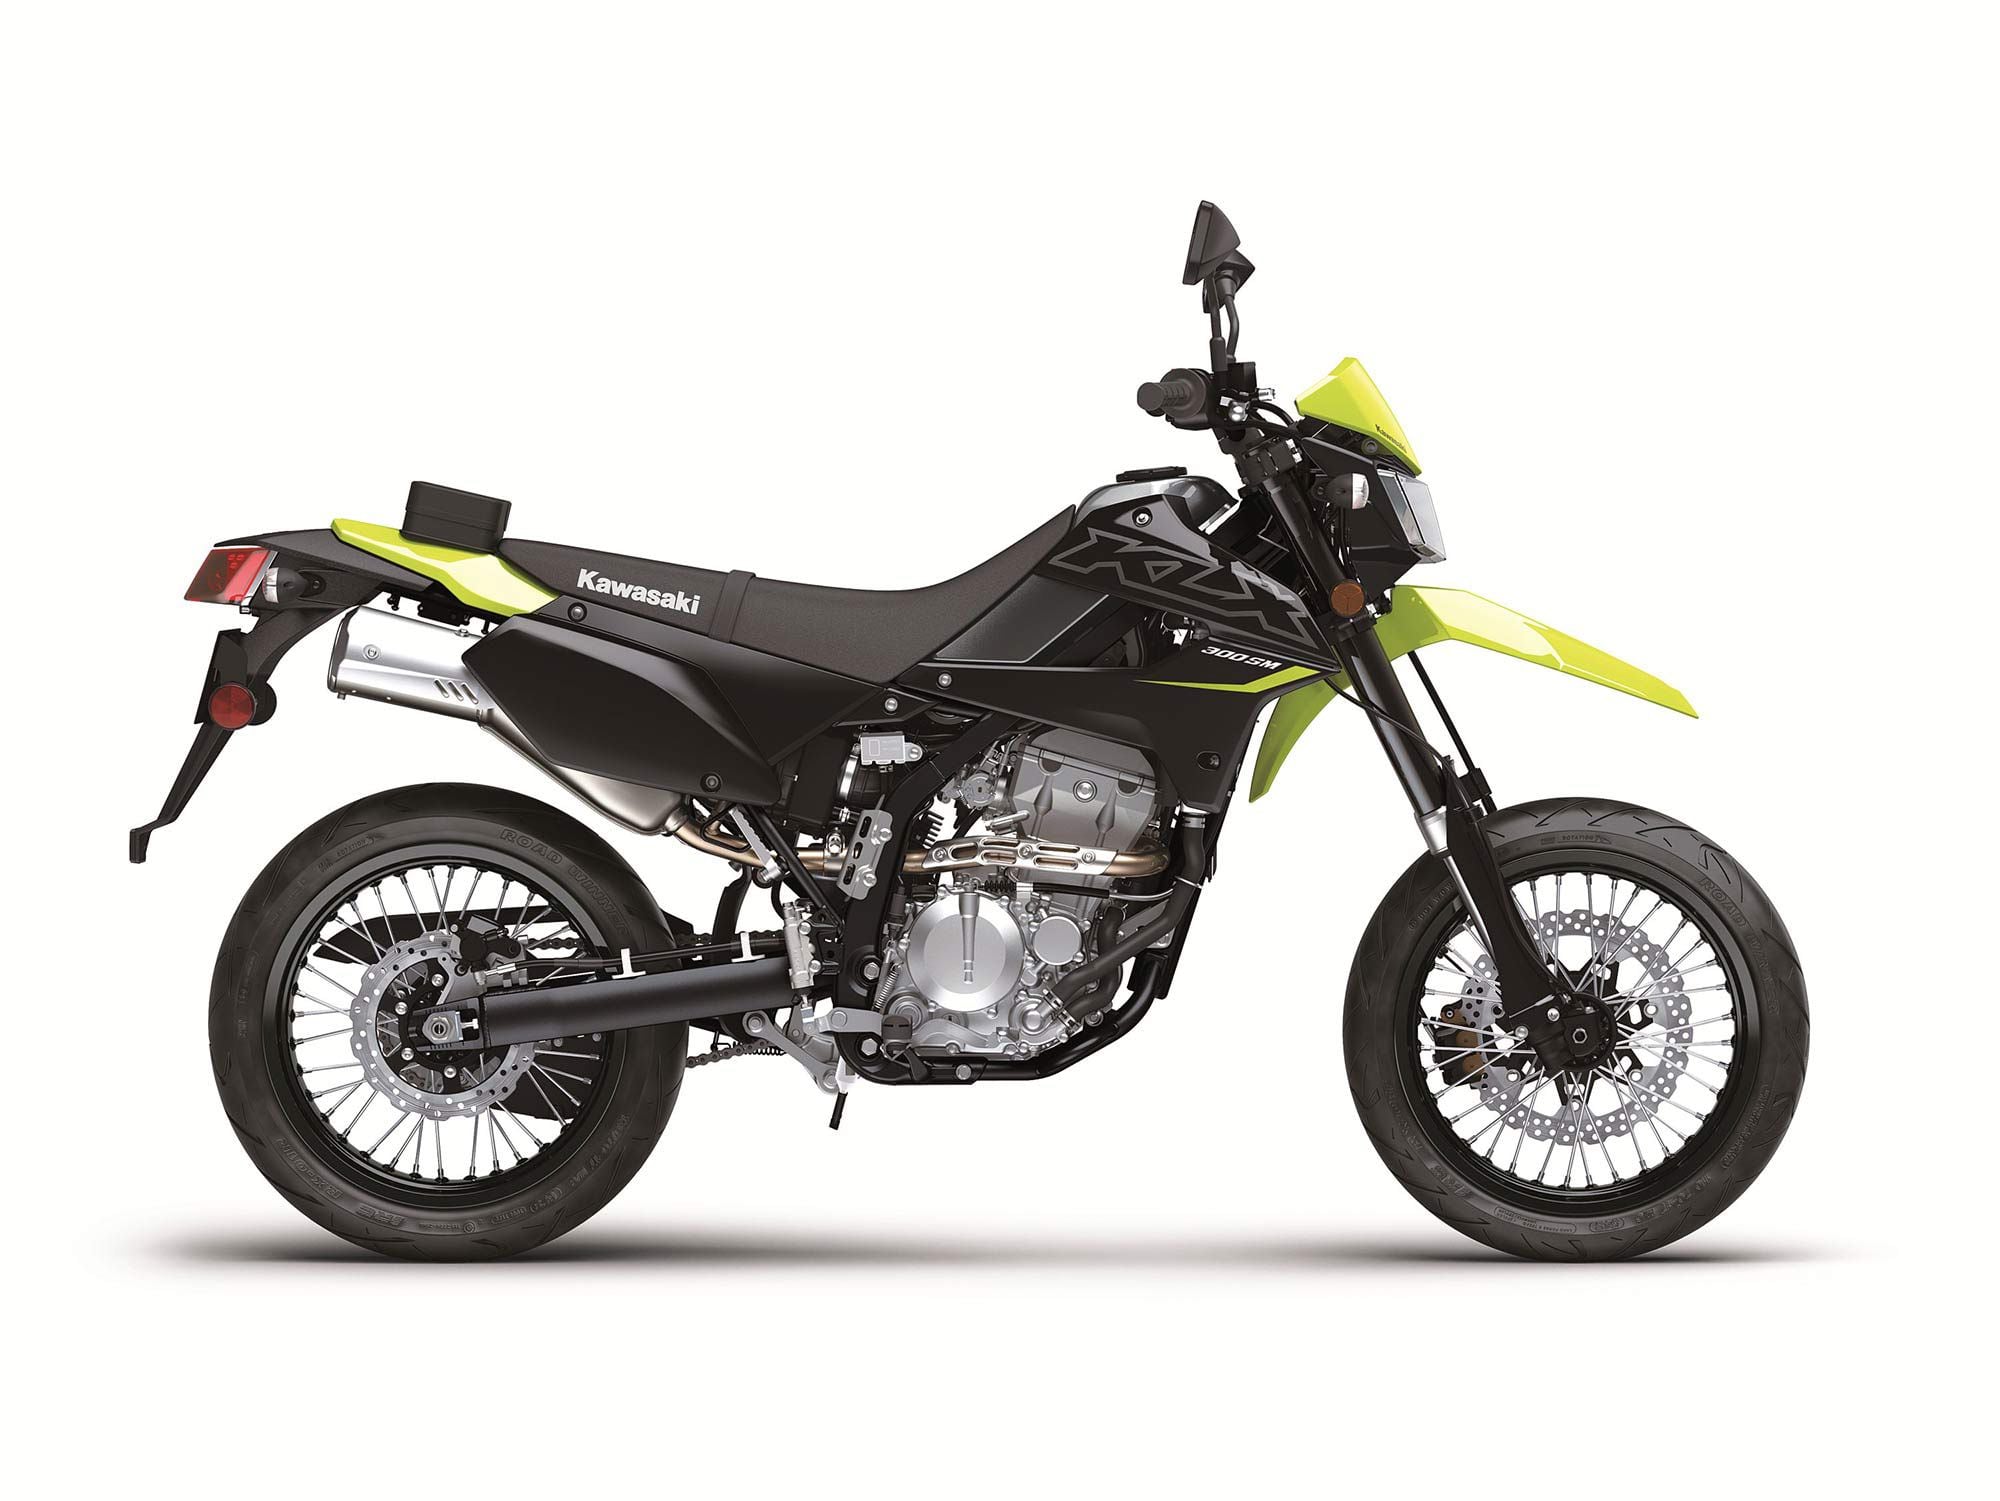 Supermoto-inspired bodywork and hardware separate the KLX300SM from the dual-sport models.